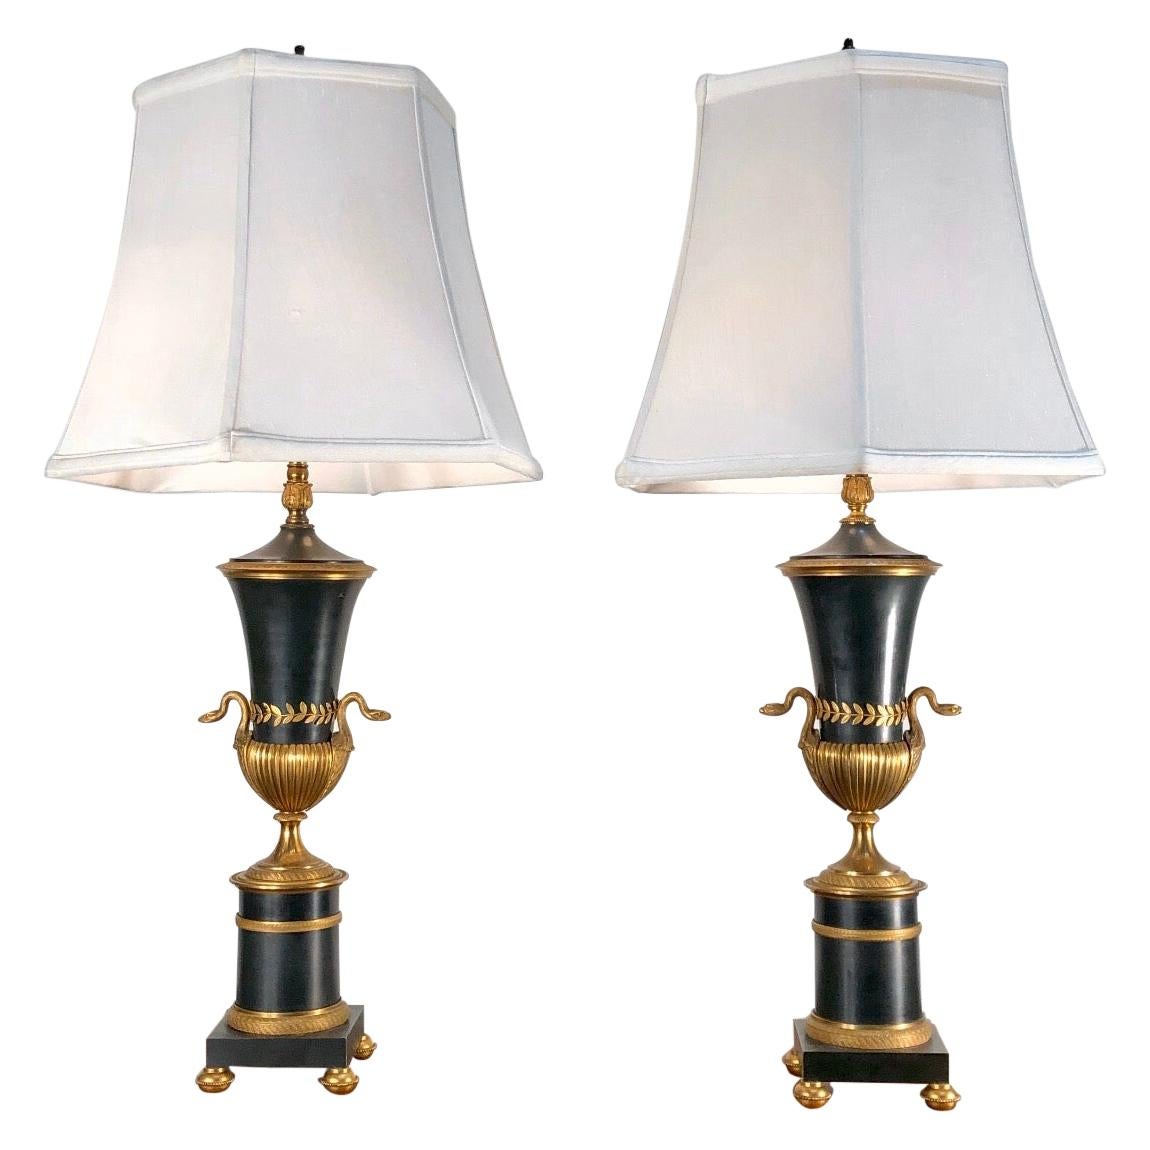 19th Century French Empire Lamps with Bronze Urns and Ormolu-Mounted Swans, Pair